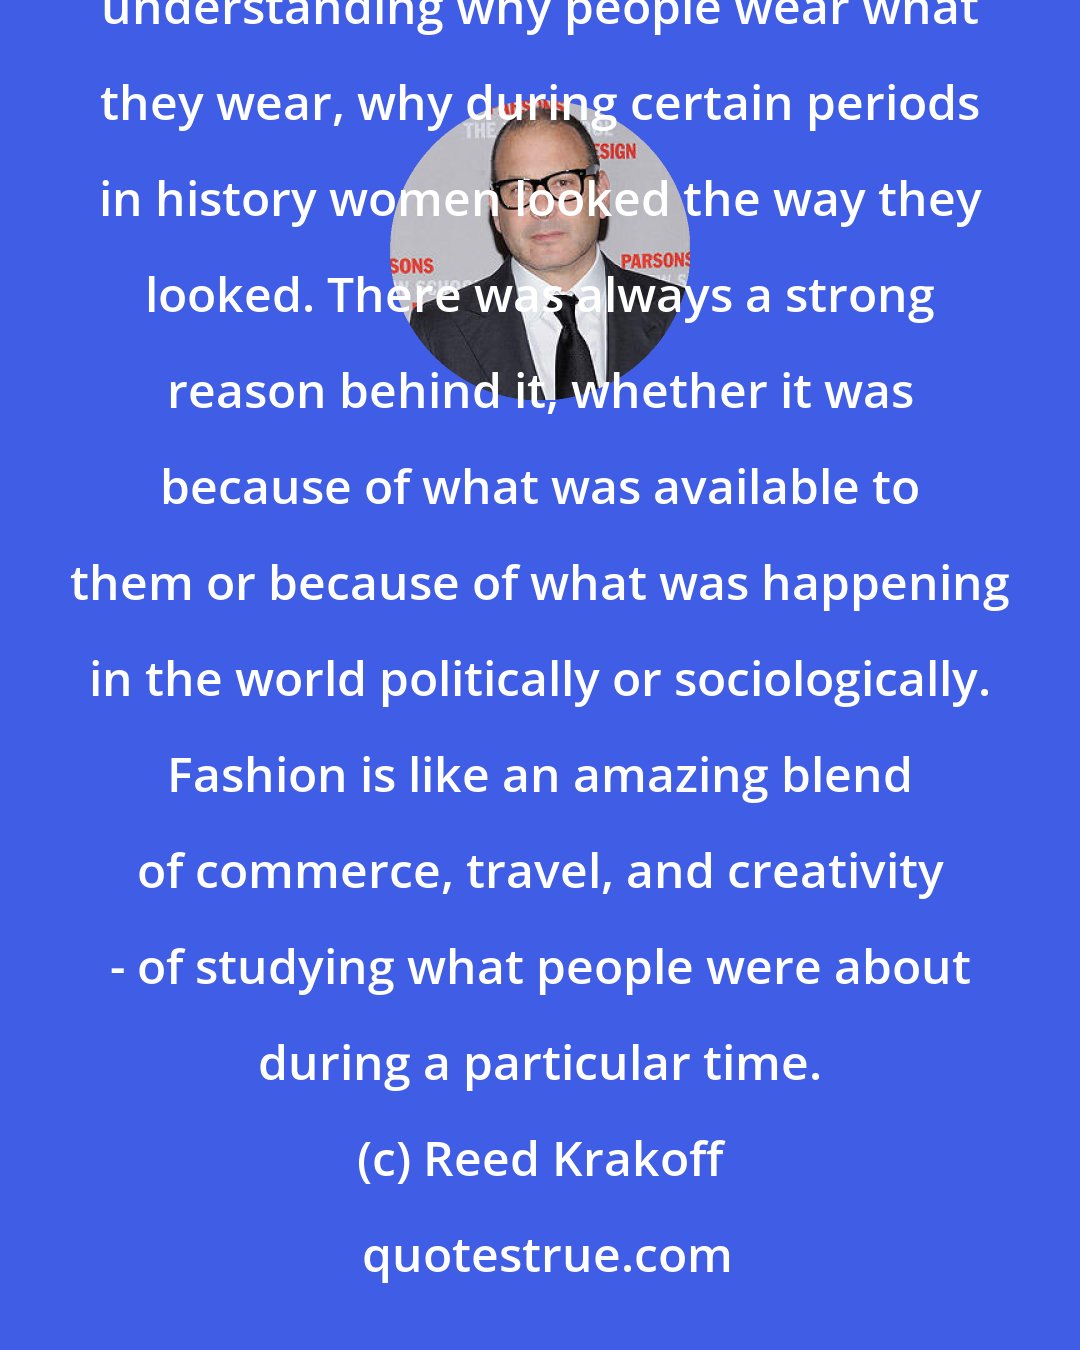 Reed Krakoff: Fashion for me is the perfect combination of all the things I love. There's an element of history to it. I love understanding why people wear what they wear, why during certain periods in history women looked the way they looked. There was always a strong reason behind it, whether it was because of what was available to them or because of what was happening in the world politically or sociologically. Fashion is like an amazing blend of commerce, travel, and creativity - of studying what people were about during a particular time.